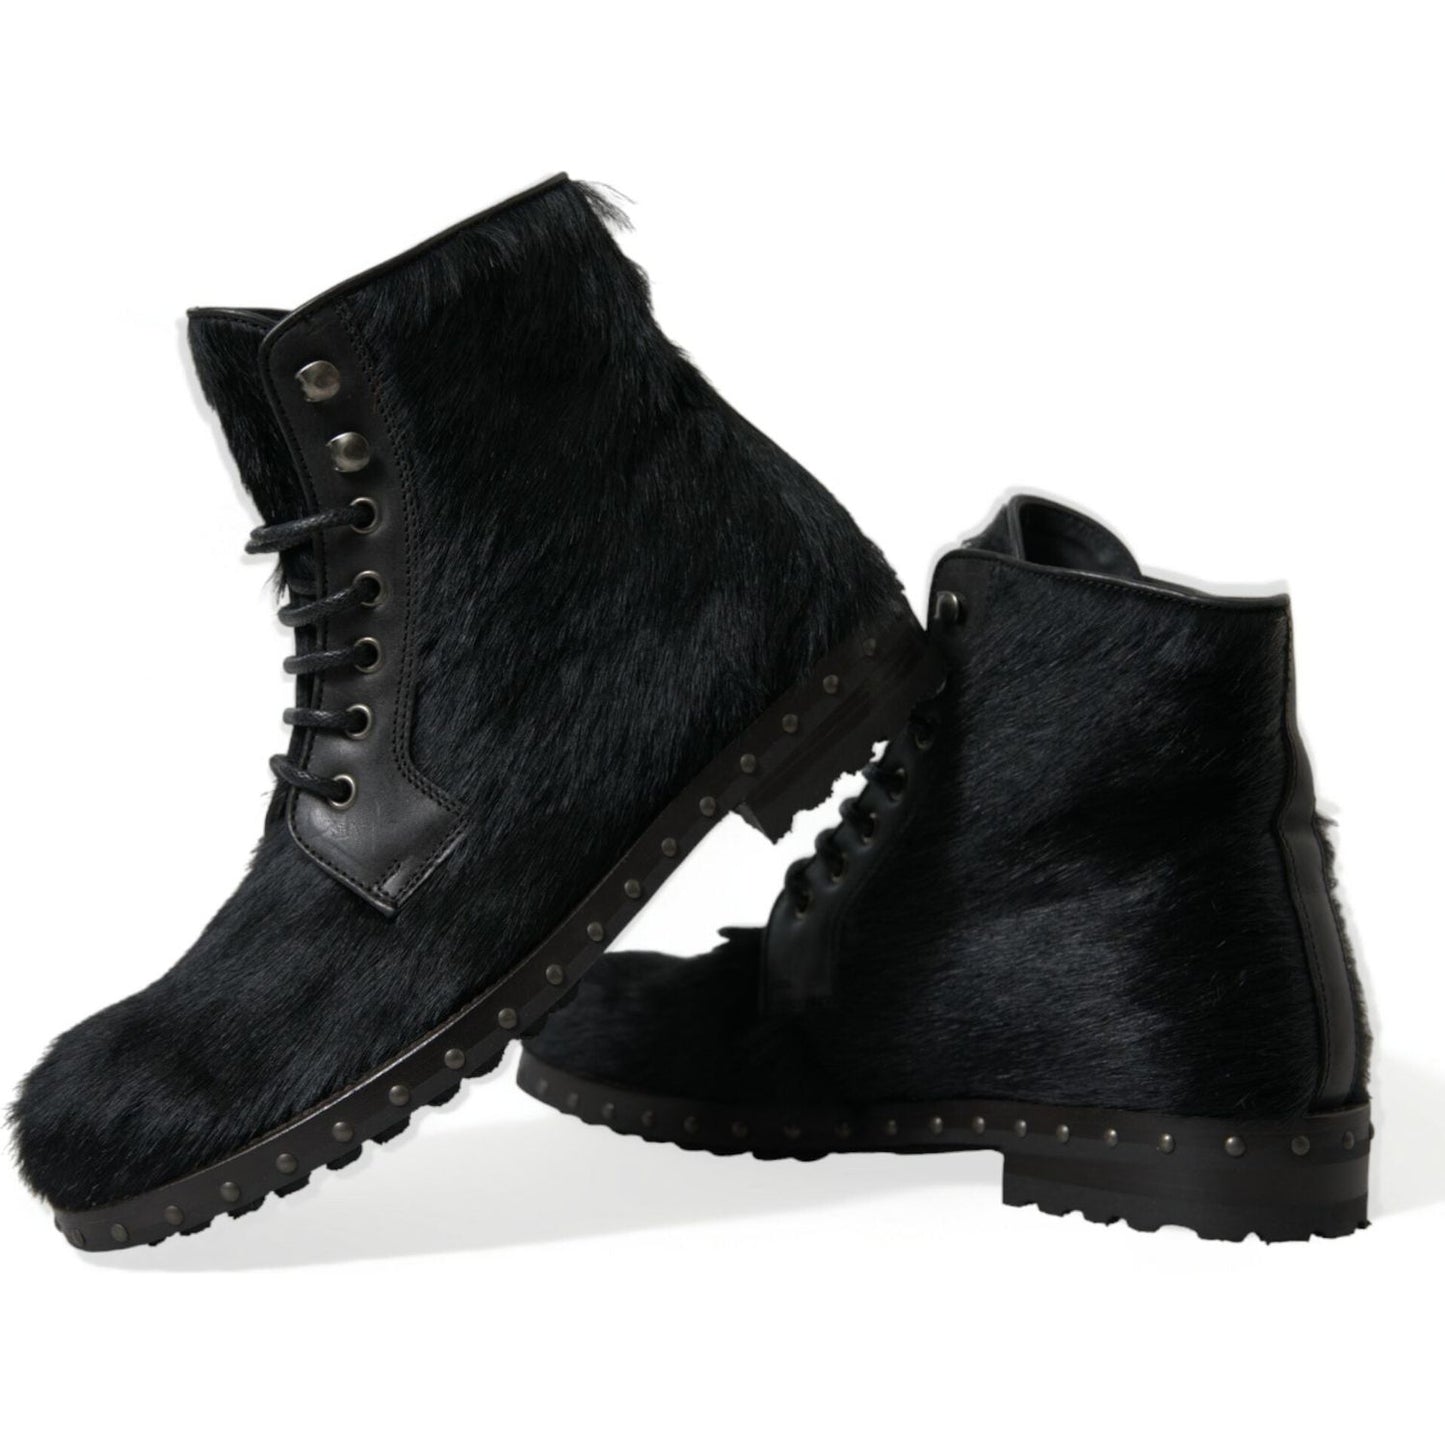 Dolce & Gabbana Elegant Black Calf Leather Lace-Up Boots black-pony-style-leather-mid-calf-boots-shoes